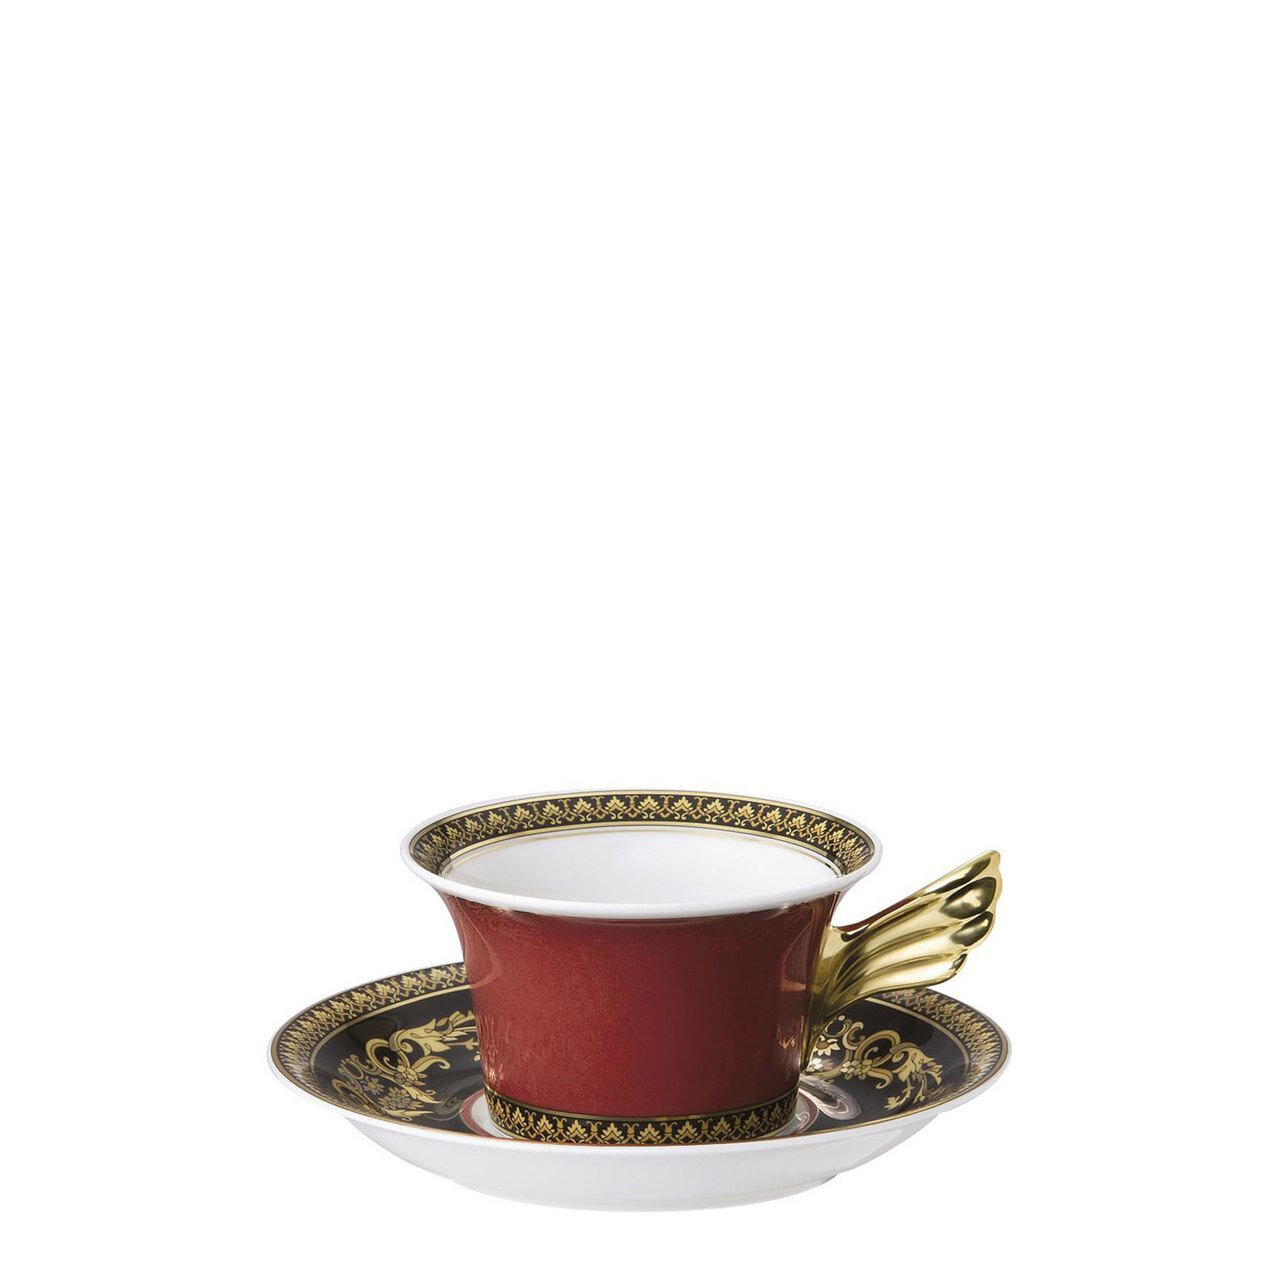 Versace Medusa Red Tea Cup and Saucer 6 1/4 Inch 7 oz.